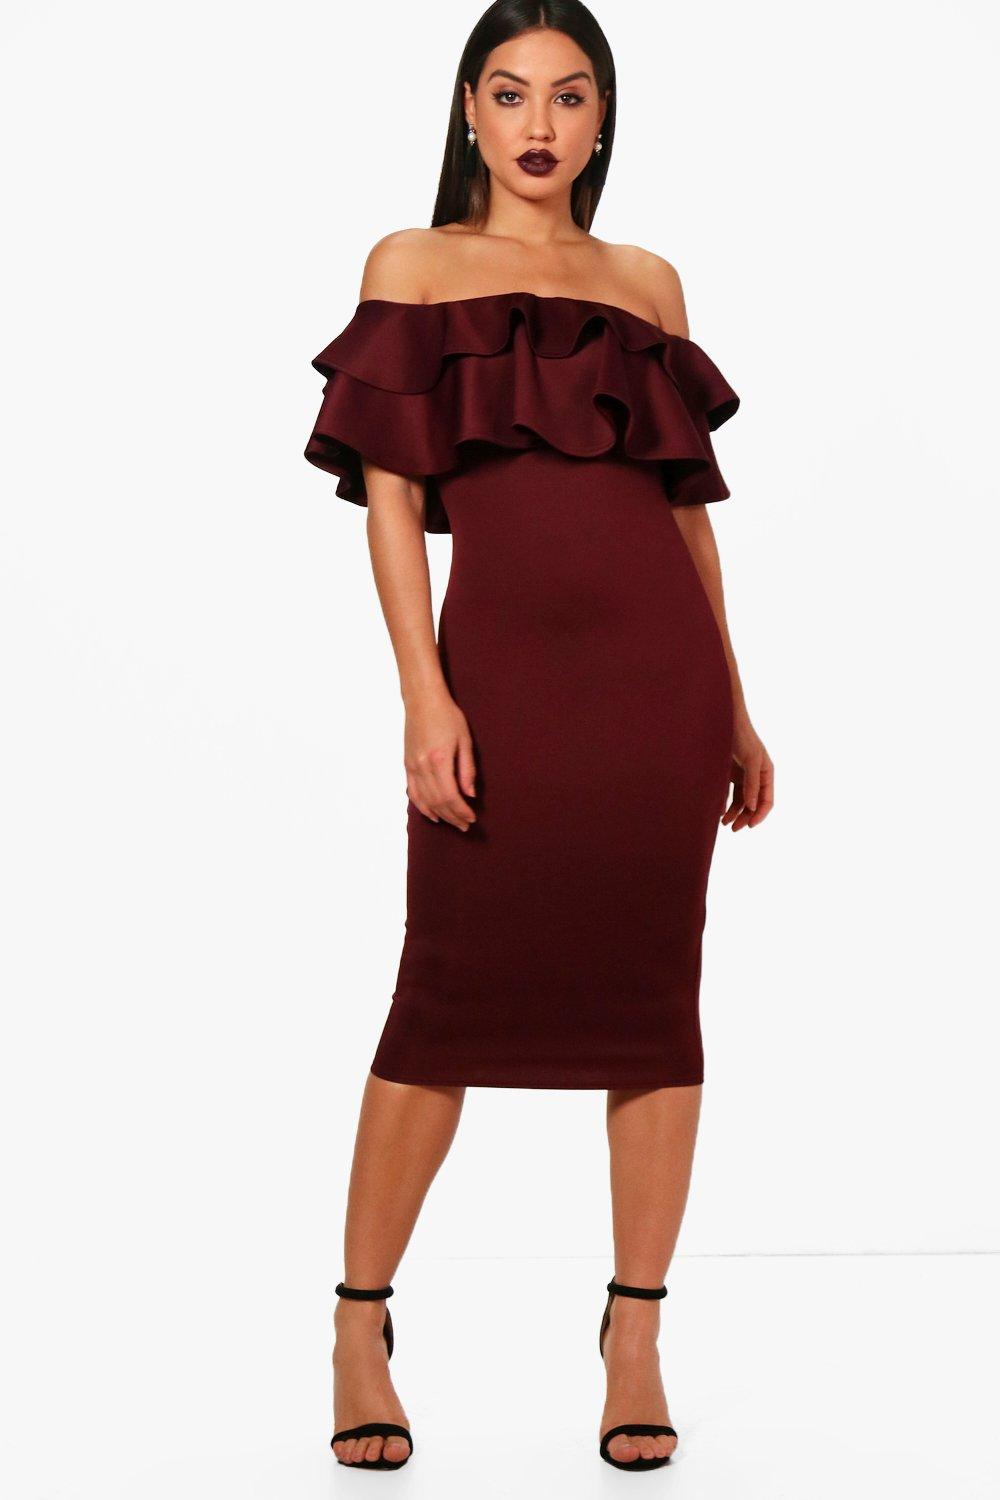 thanksgiving dresses for adults